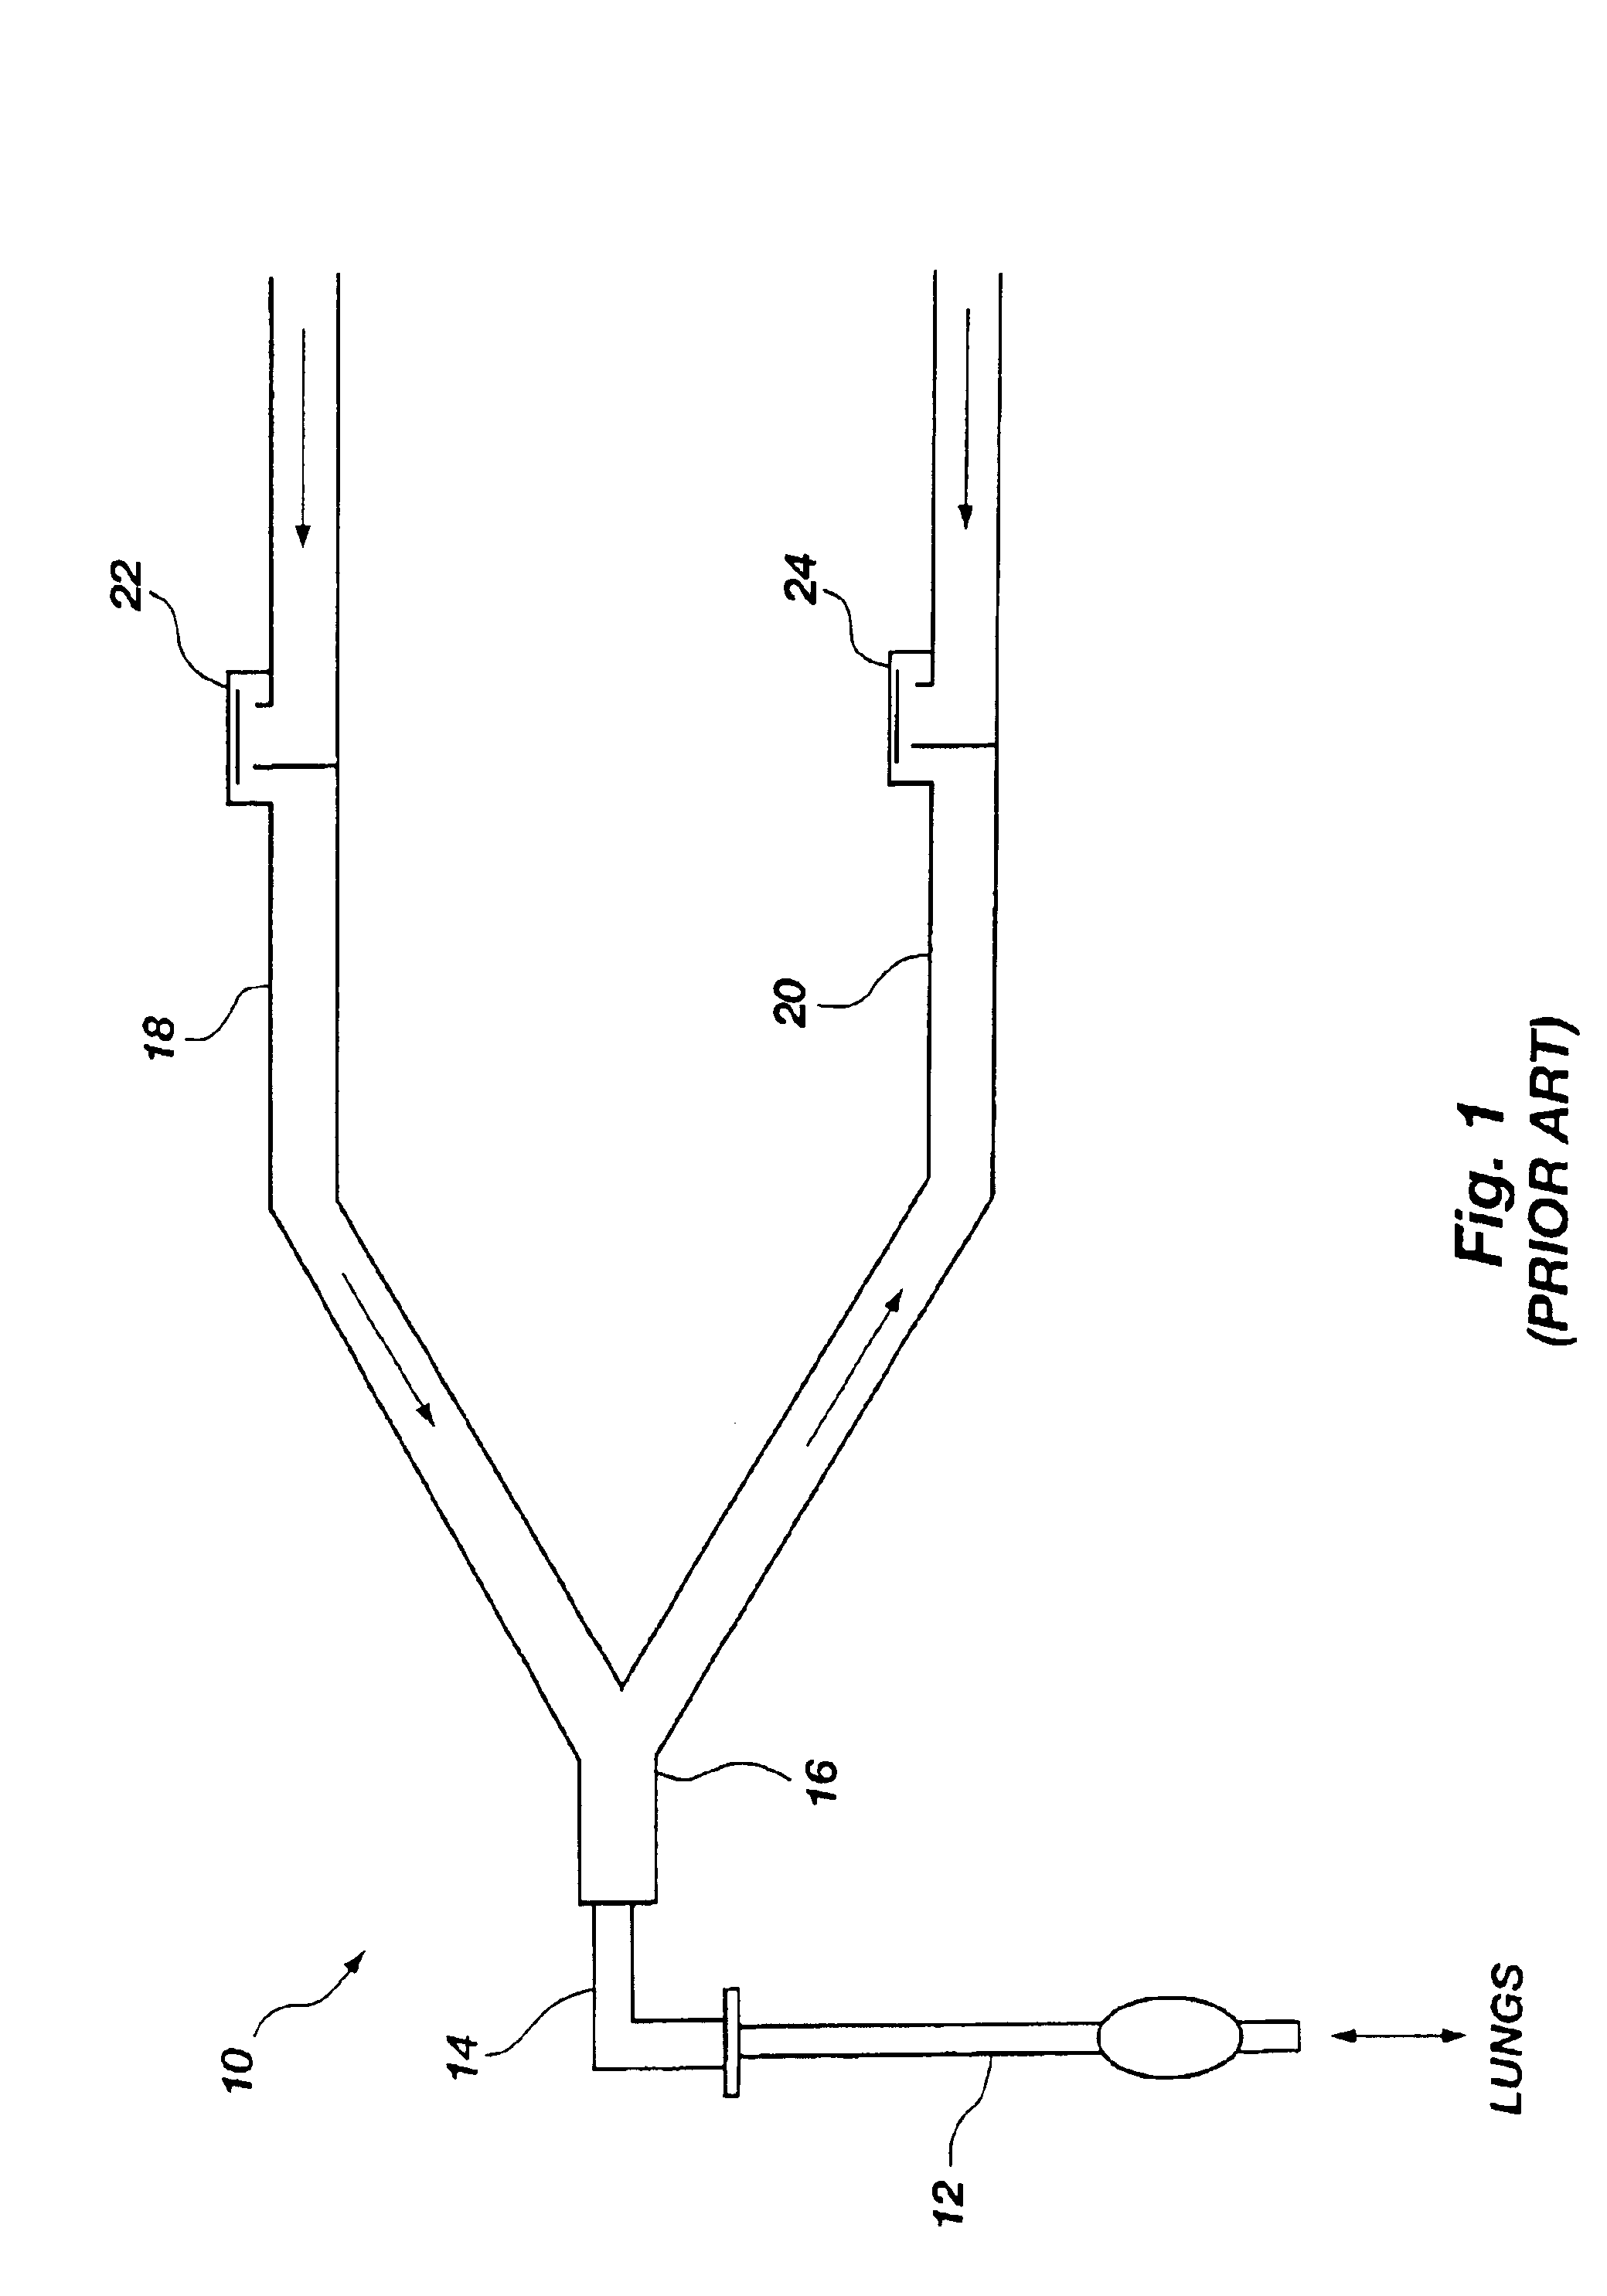 Apparatus and method for non-invasively measuring cardiac output